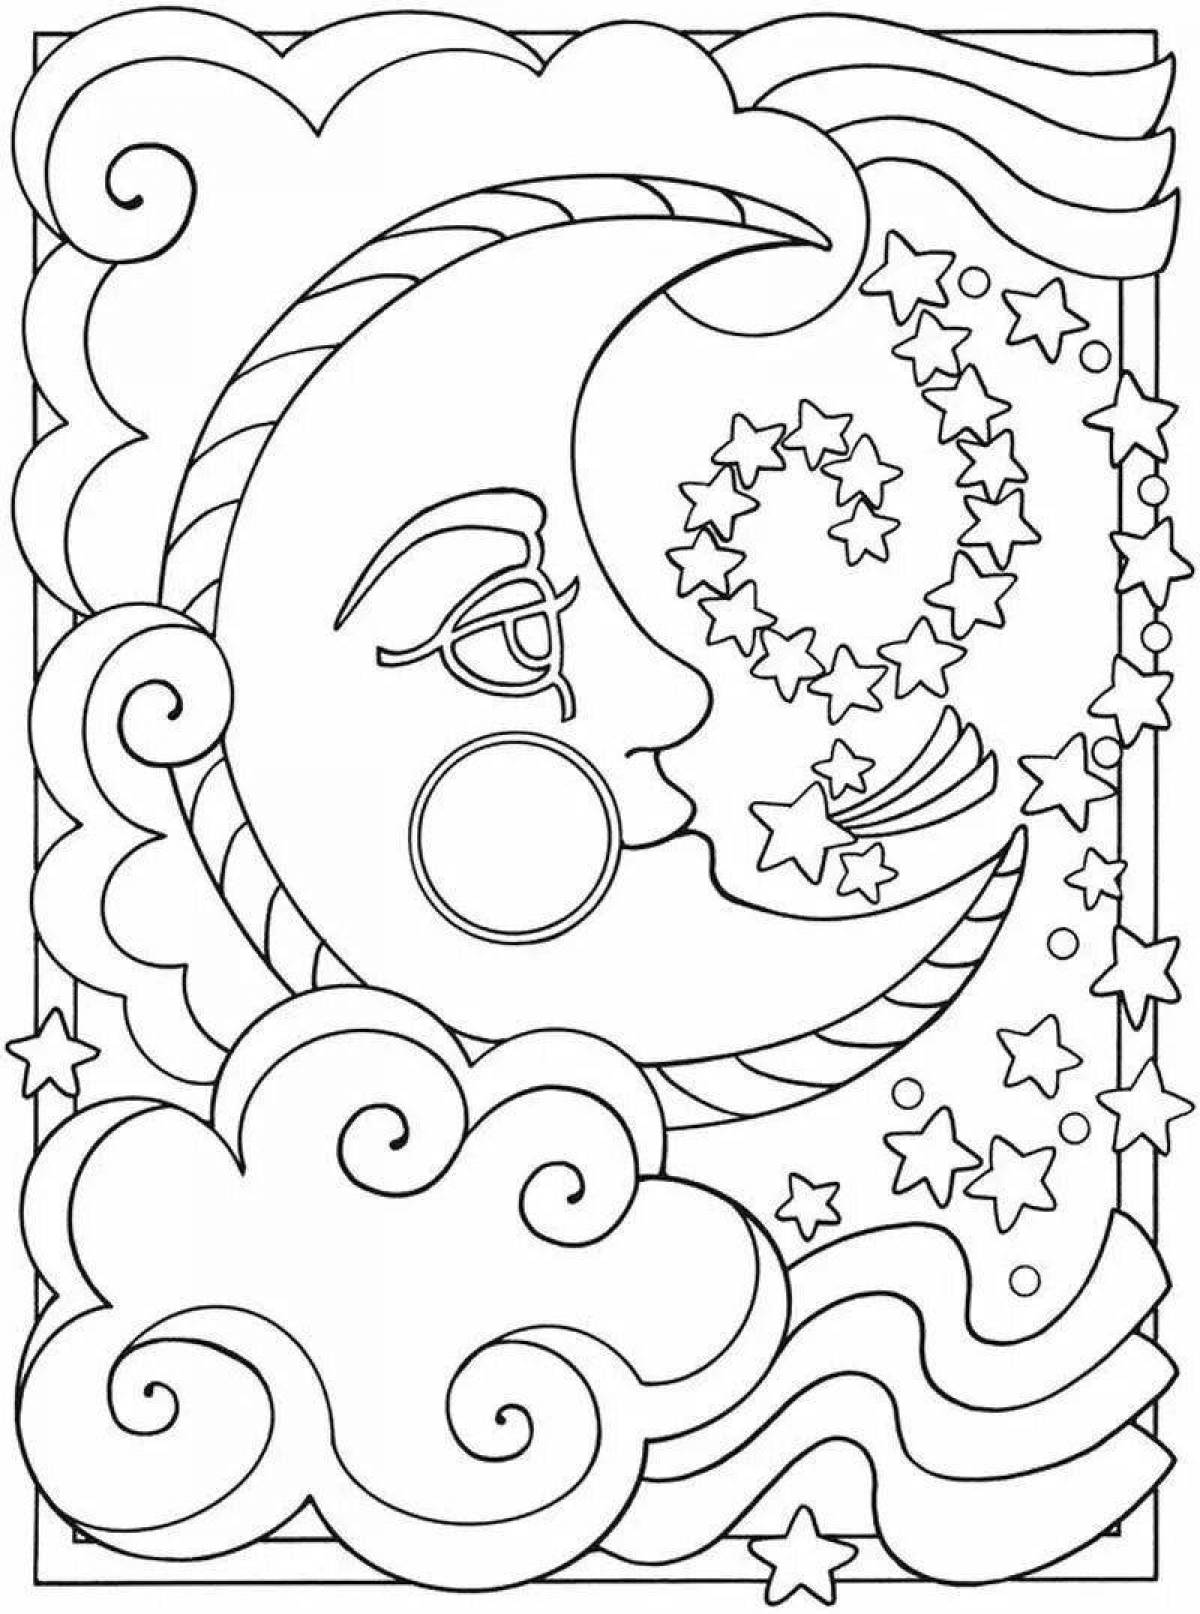 Exotic moon and sun coloring book for kids